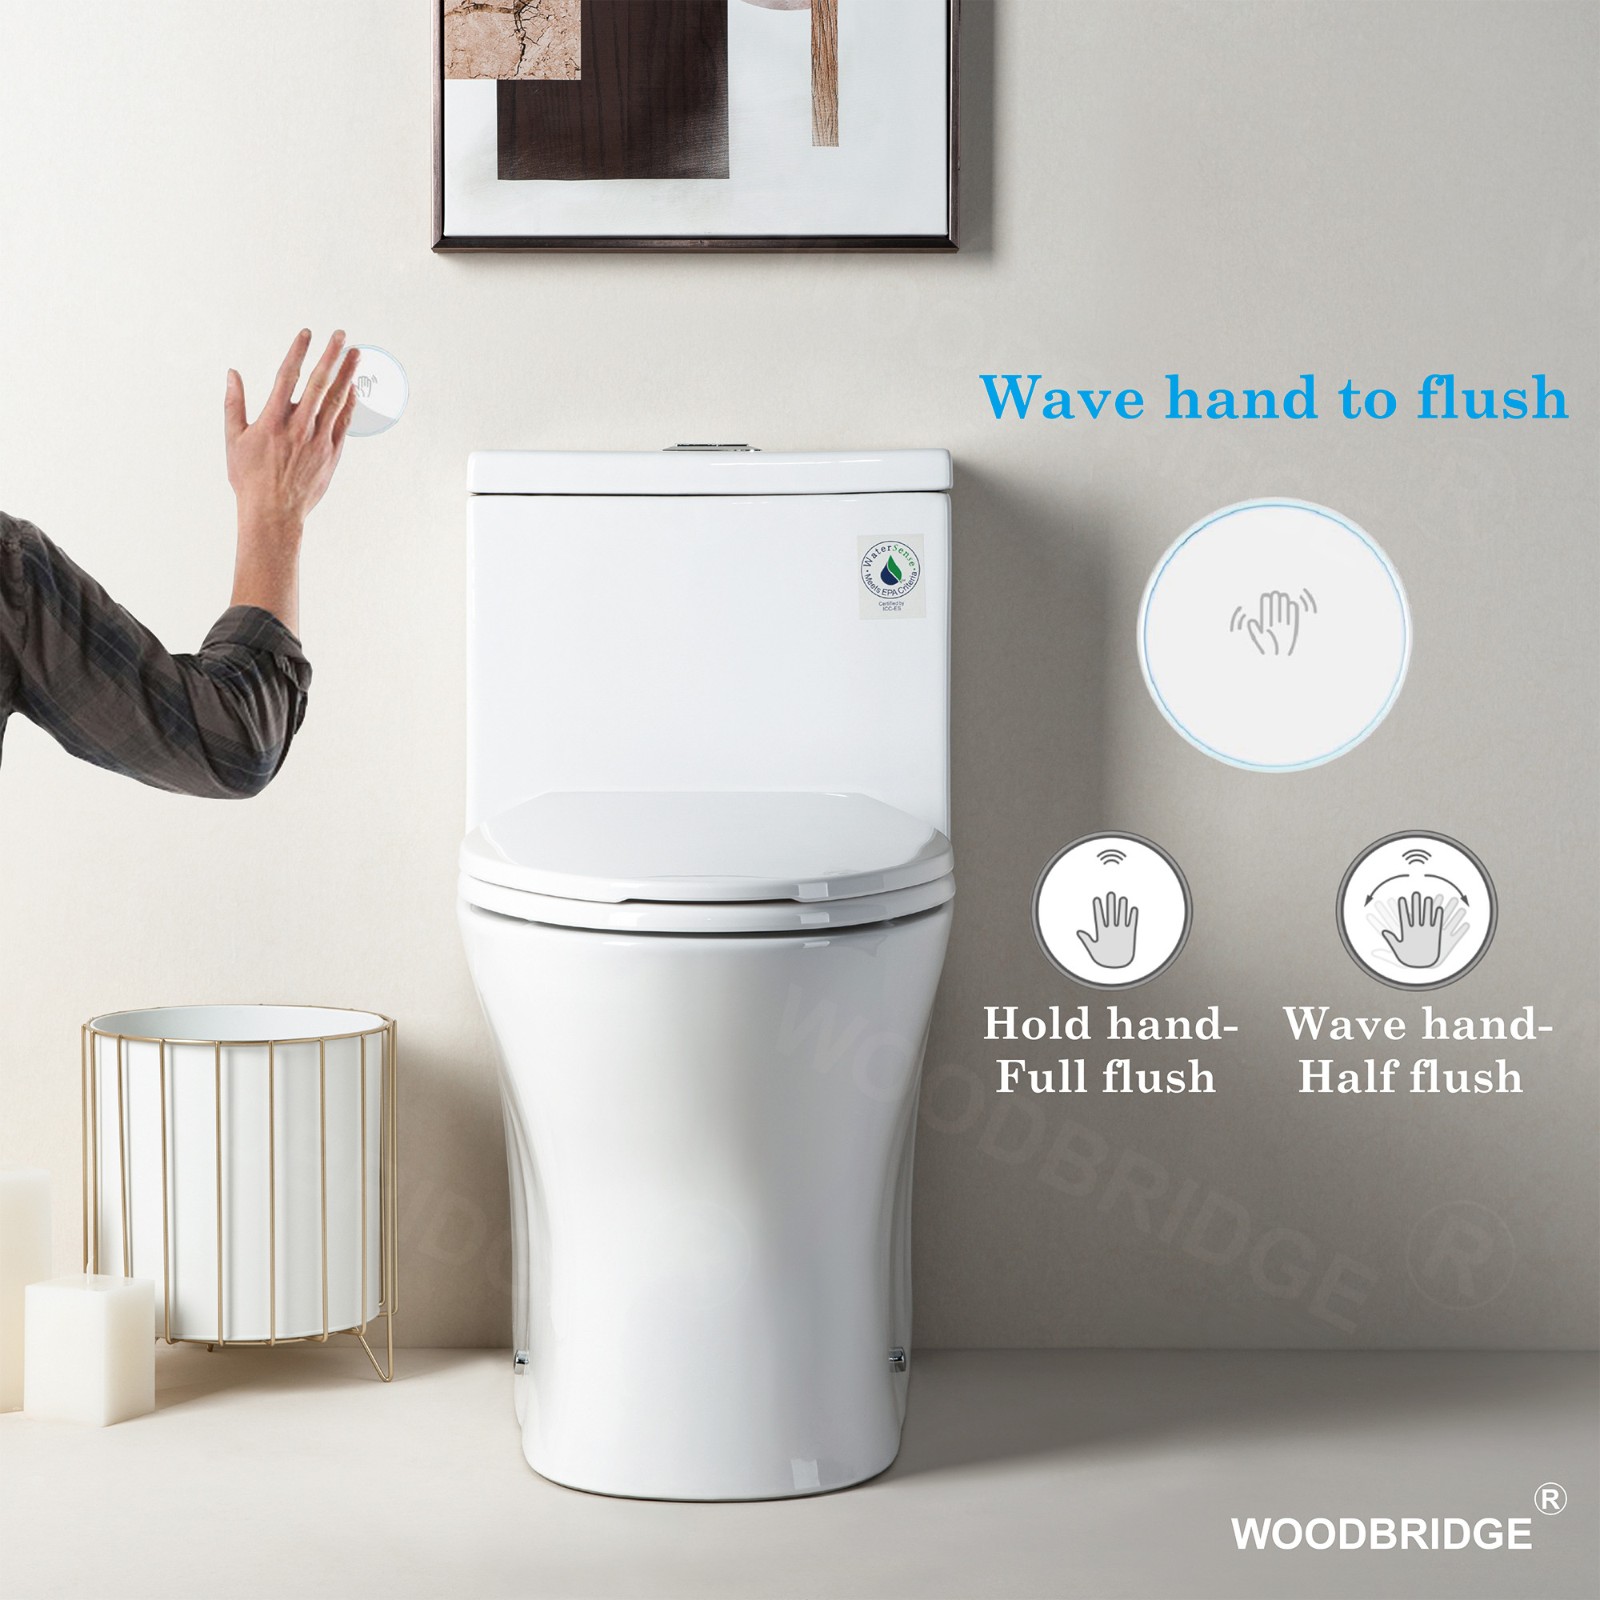  WOODBRIDGE B-0750-A Modern One-Piece Elongated toilet with Solf Closed Seat and Hand Free Touchless Sensor Flush Kit, White_5466